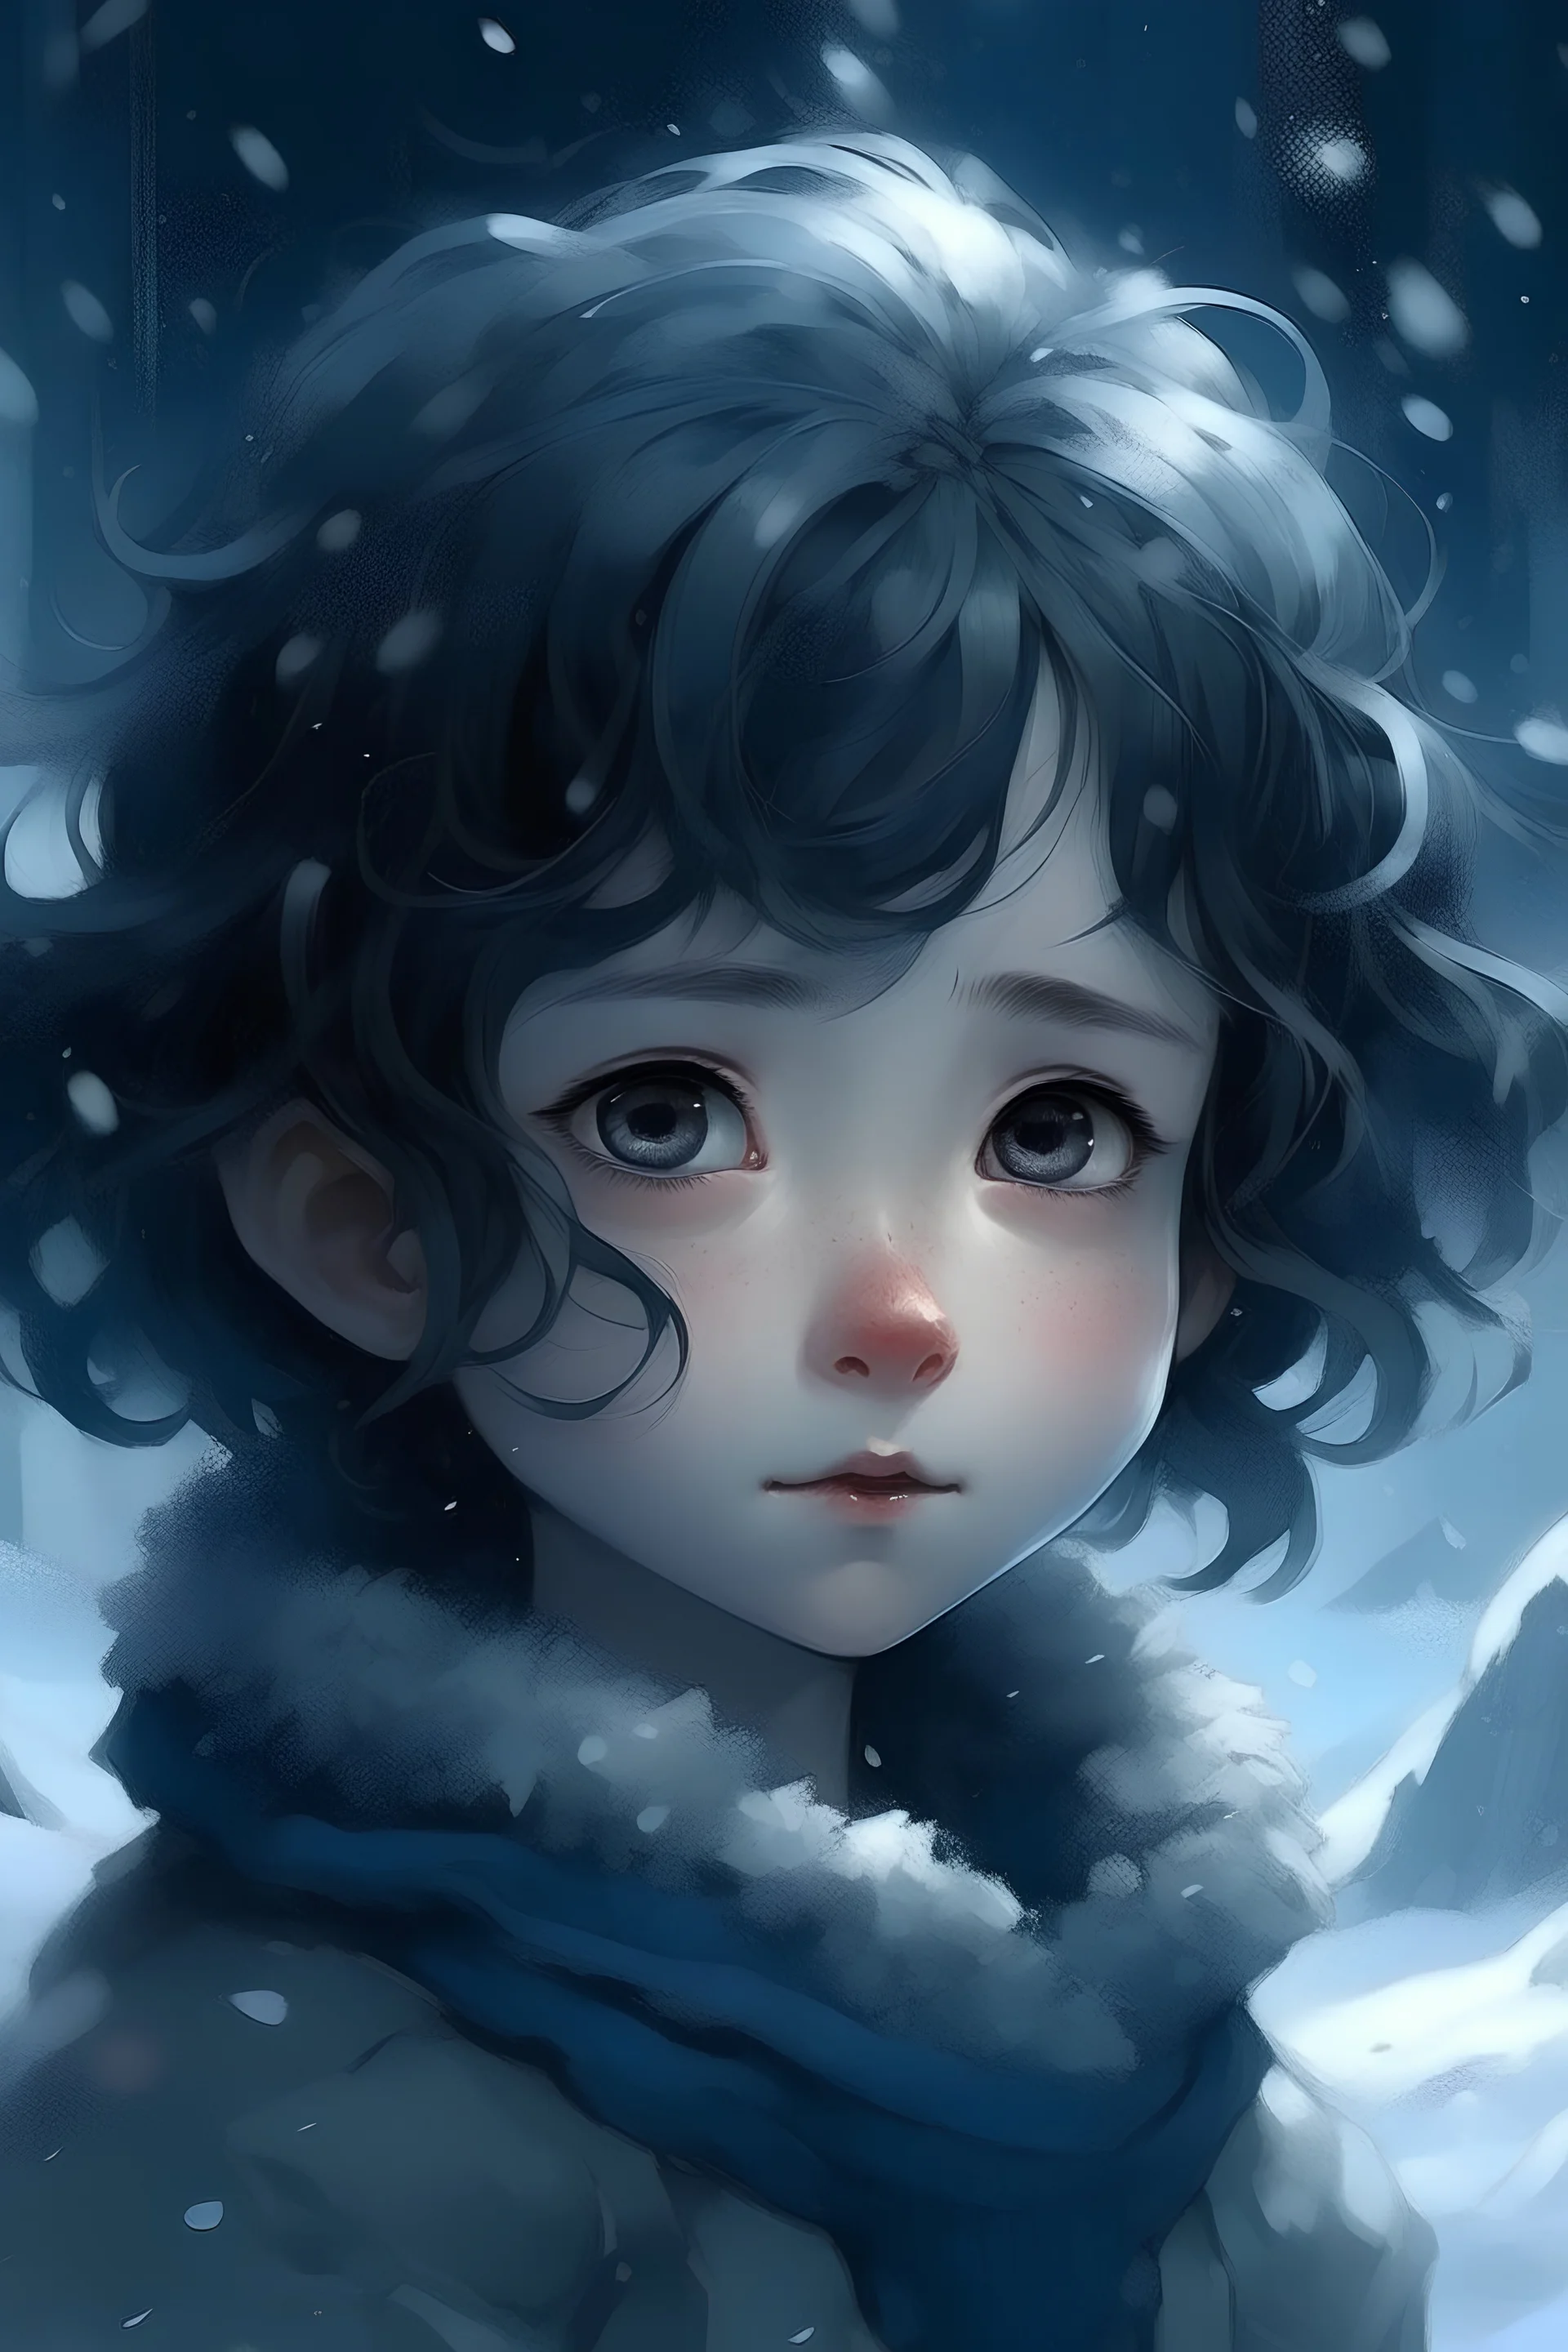 The spirit of the realm of ice and snow. The spirit takes on the form of a little girl with short curly black hair.